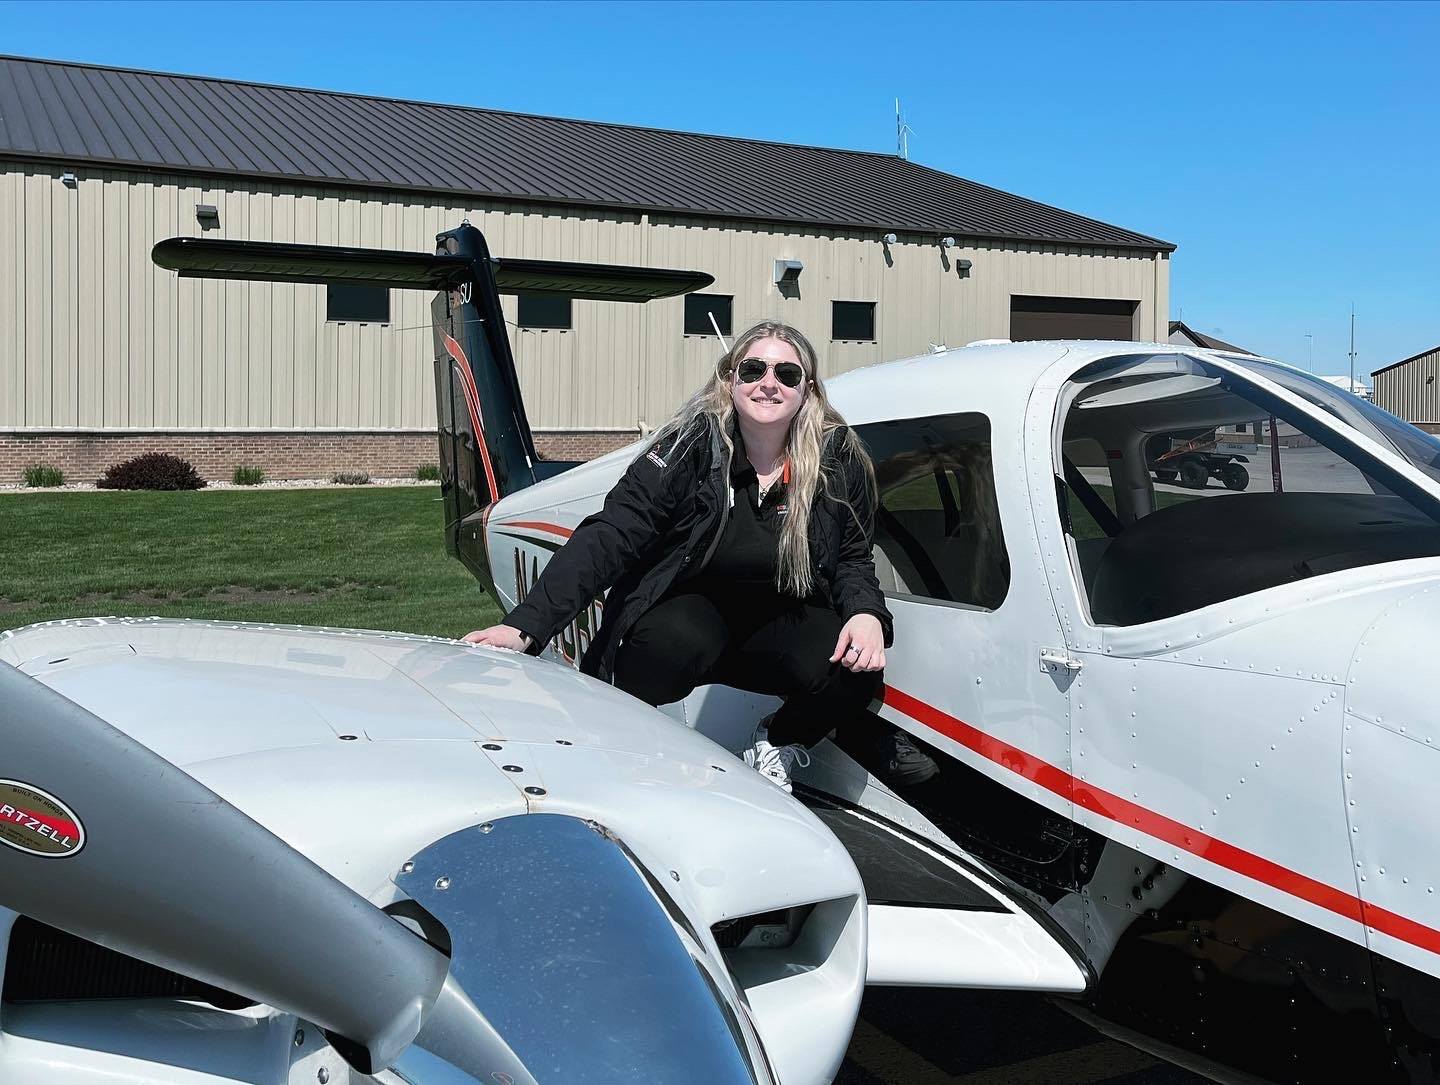 Student Lizz is dressed in all black and crouches on the wing of a single-engine BGSU airplane